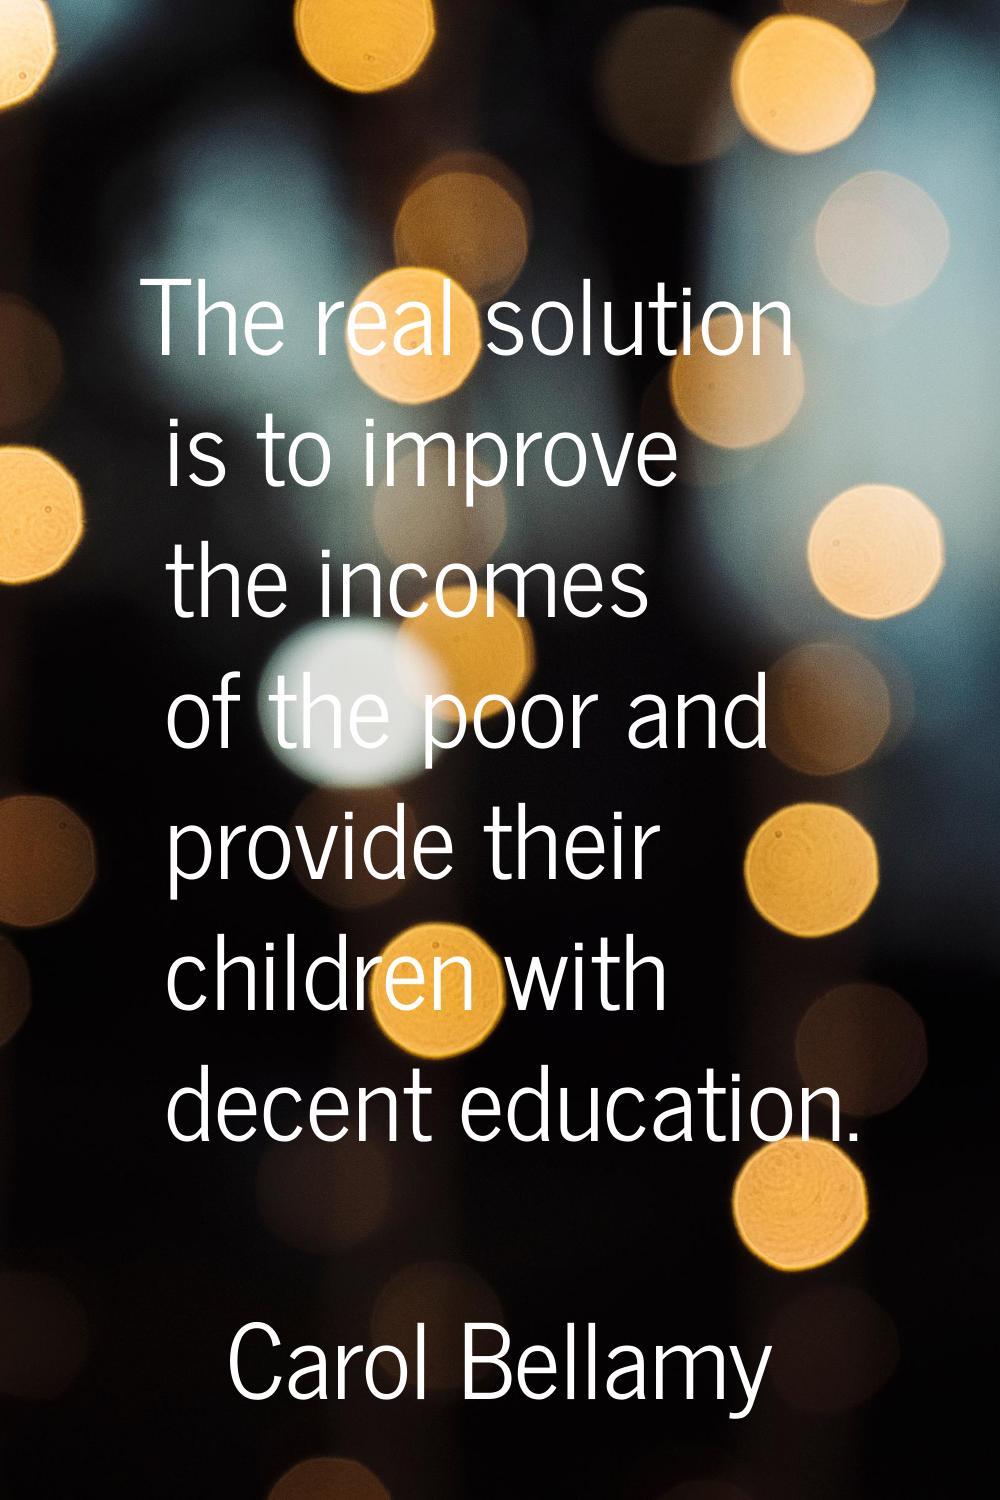 The real solution is to improve the incomes of the poor and provide their children with decent educ